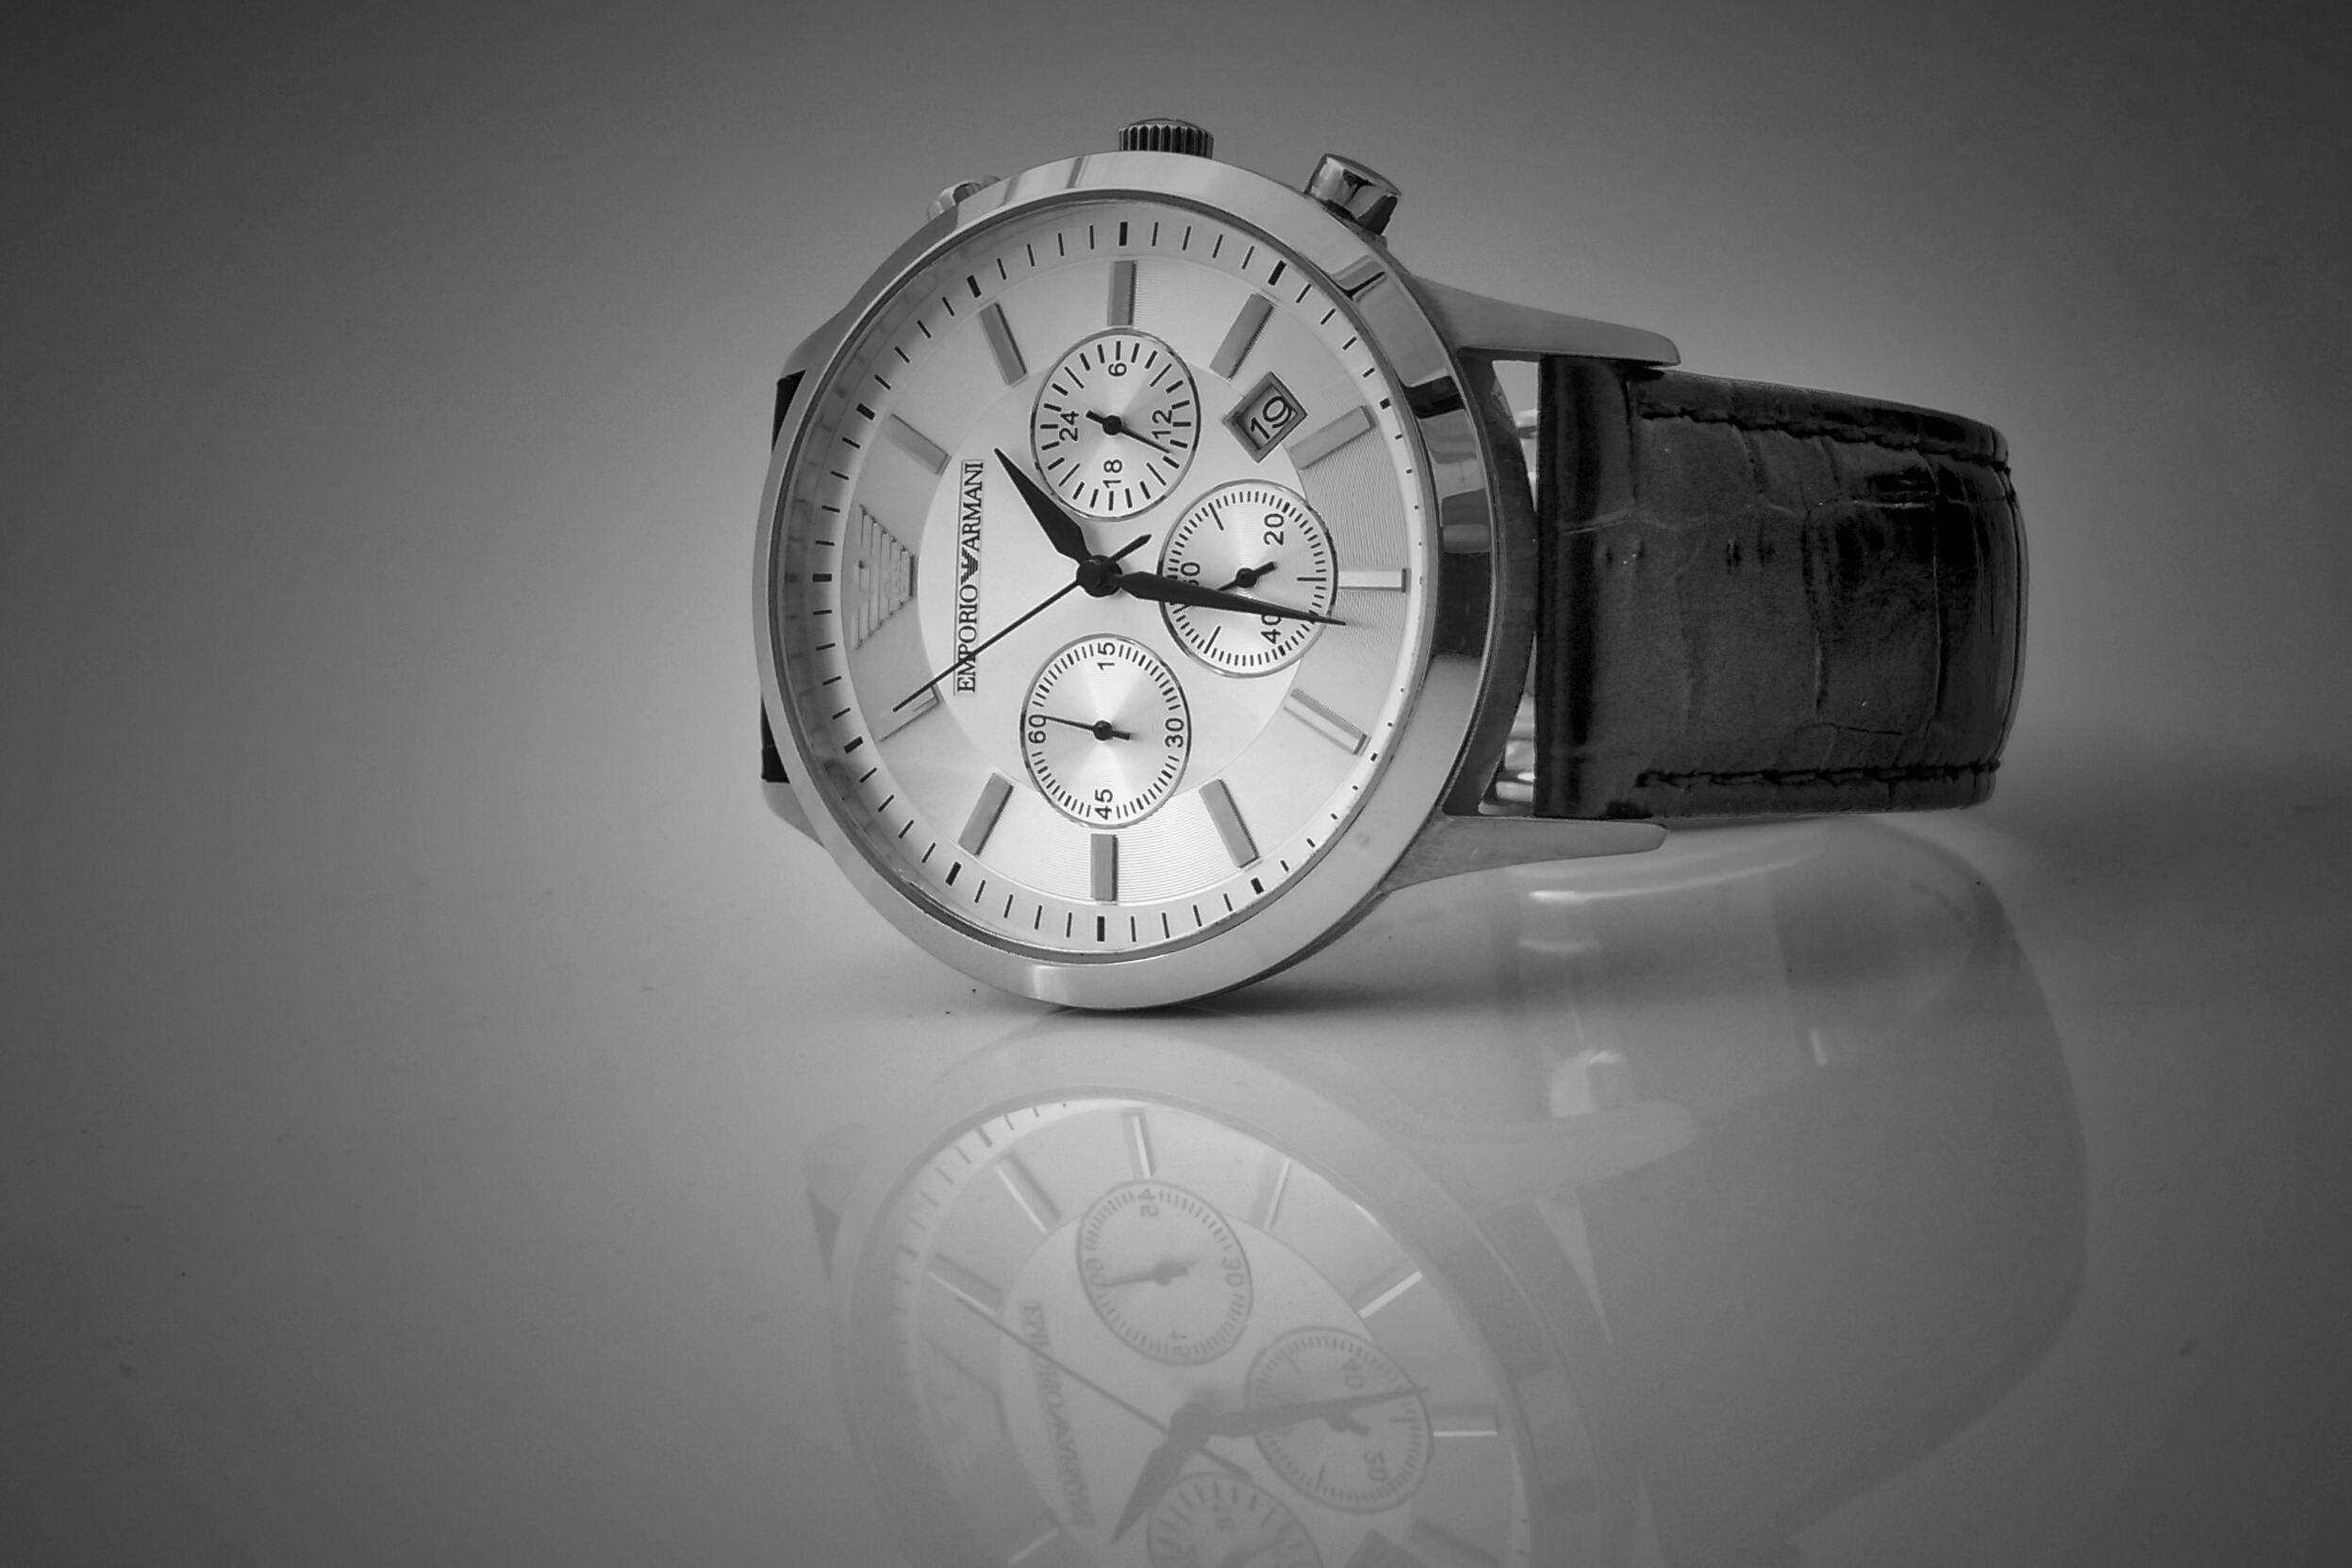 A watch, with its reflection on the table